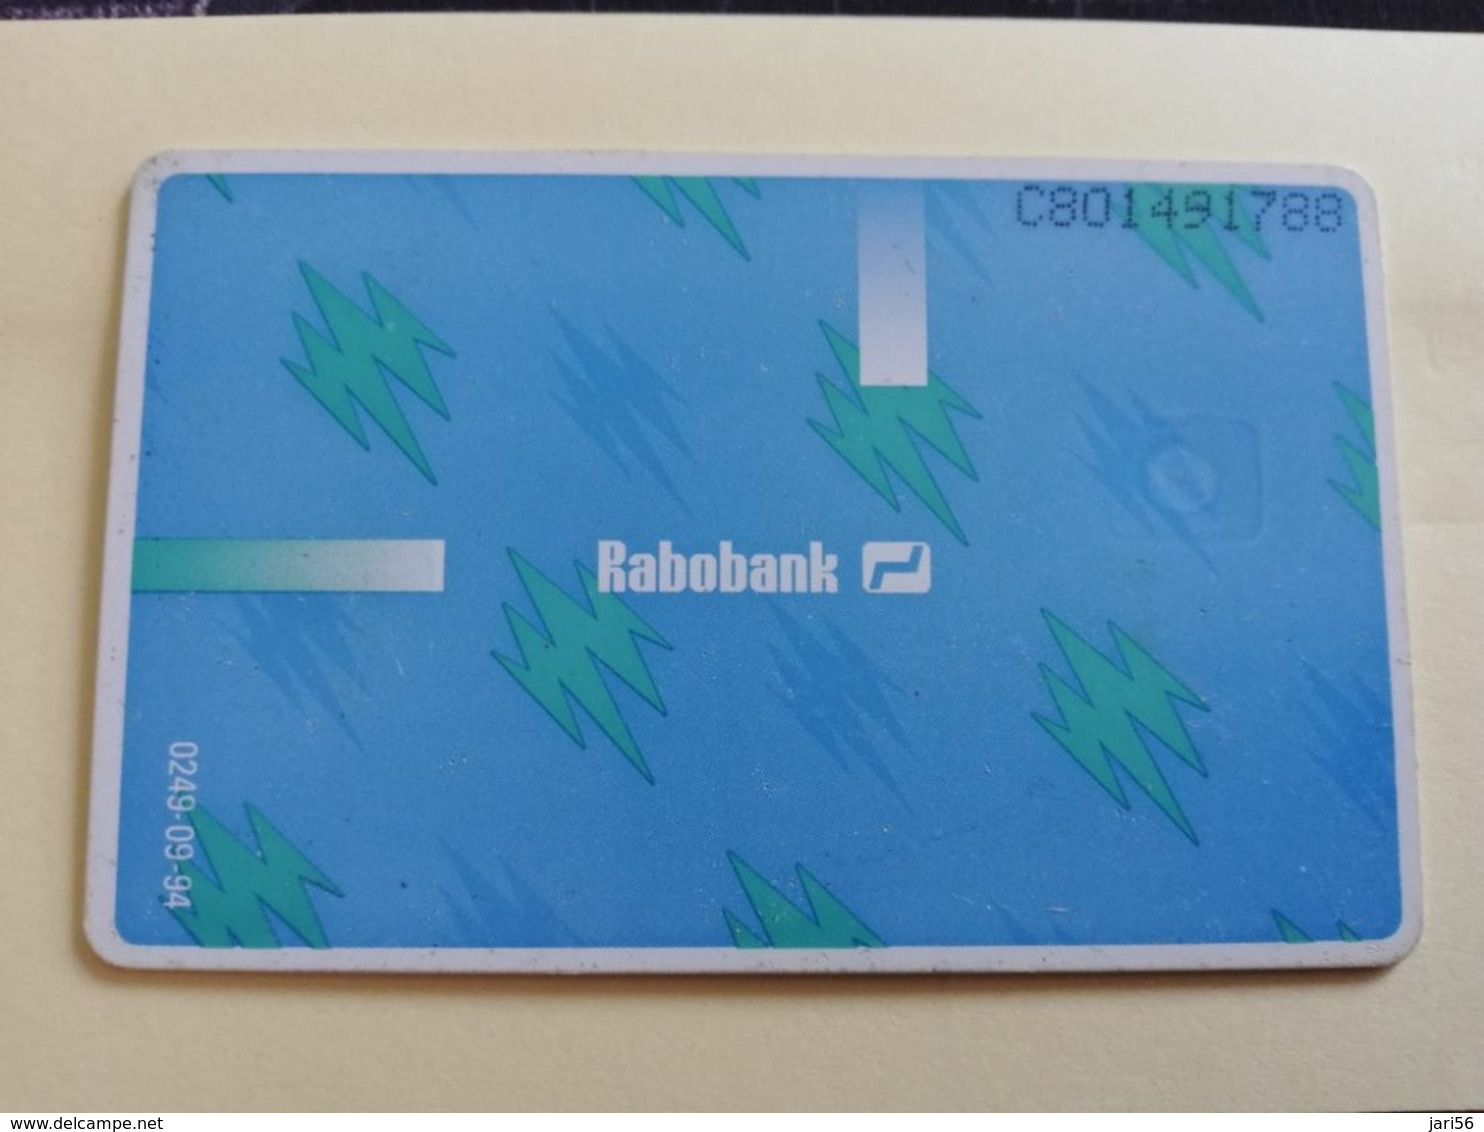 NETHERLANDS  ADVERTISING CHIPCARD HFL 2,50 CRD 016   RABOBANK     Fine Used   ** 3164** - Private